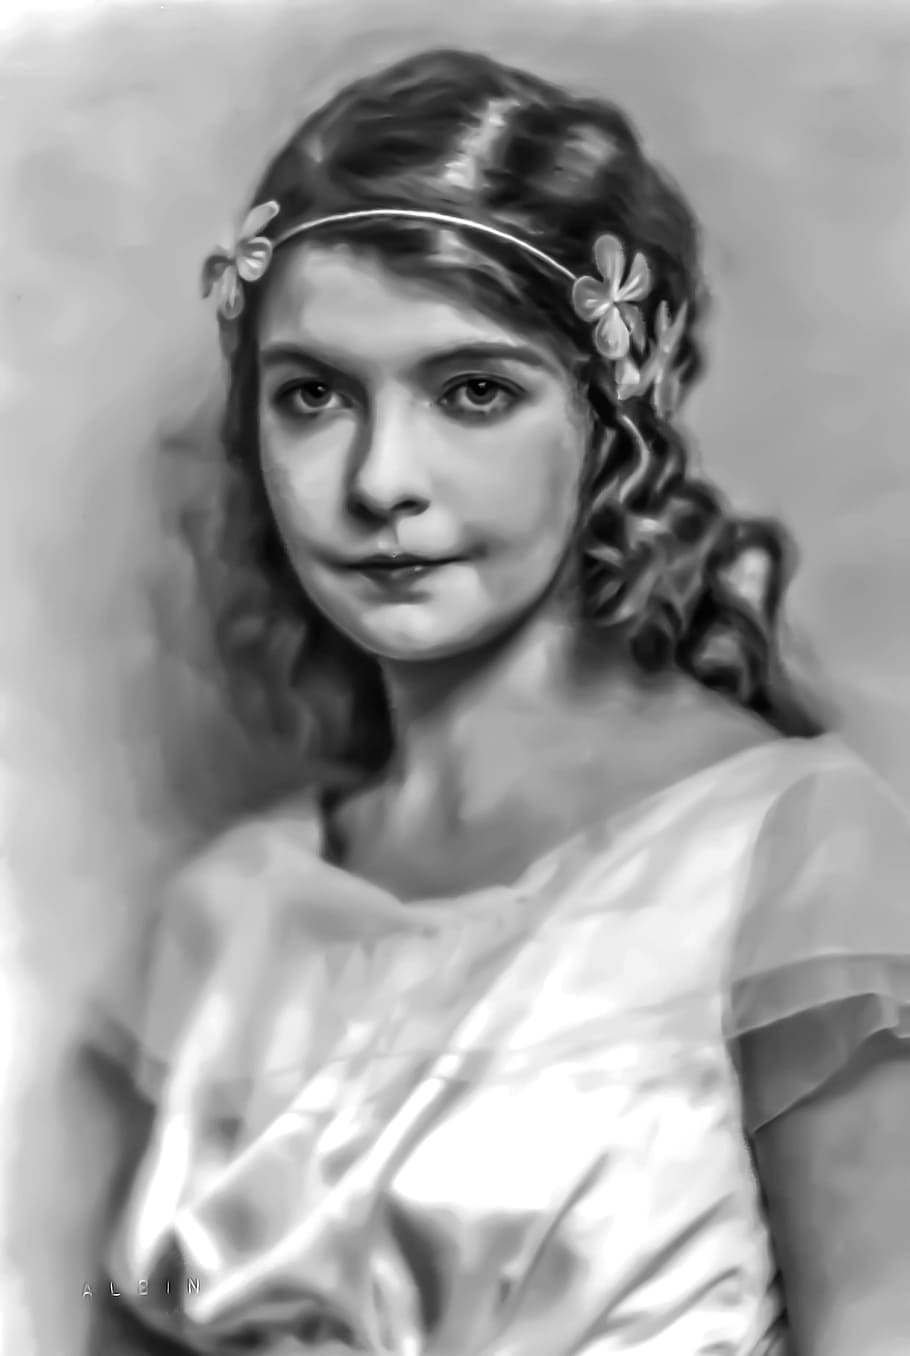 Lillian Gish, Female, Portrait, Stage, lillian gish - female, portrait, film, silent screen, actress, looking at camera, one woman only